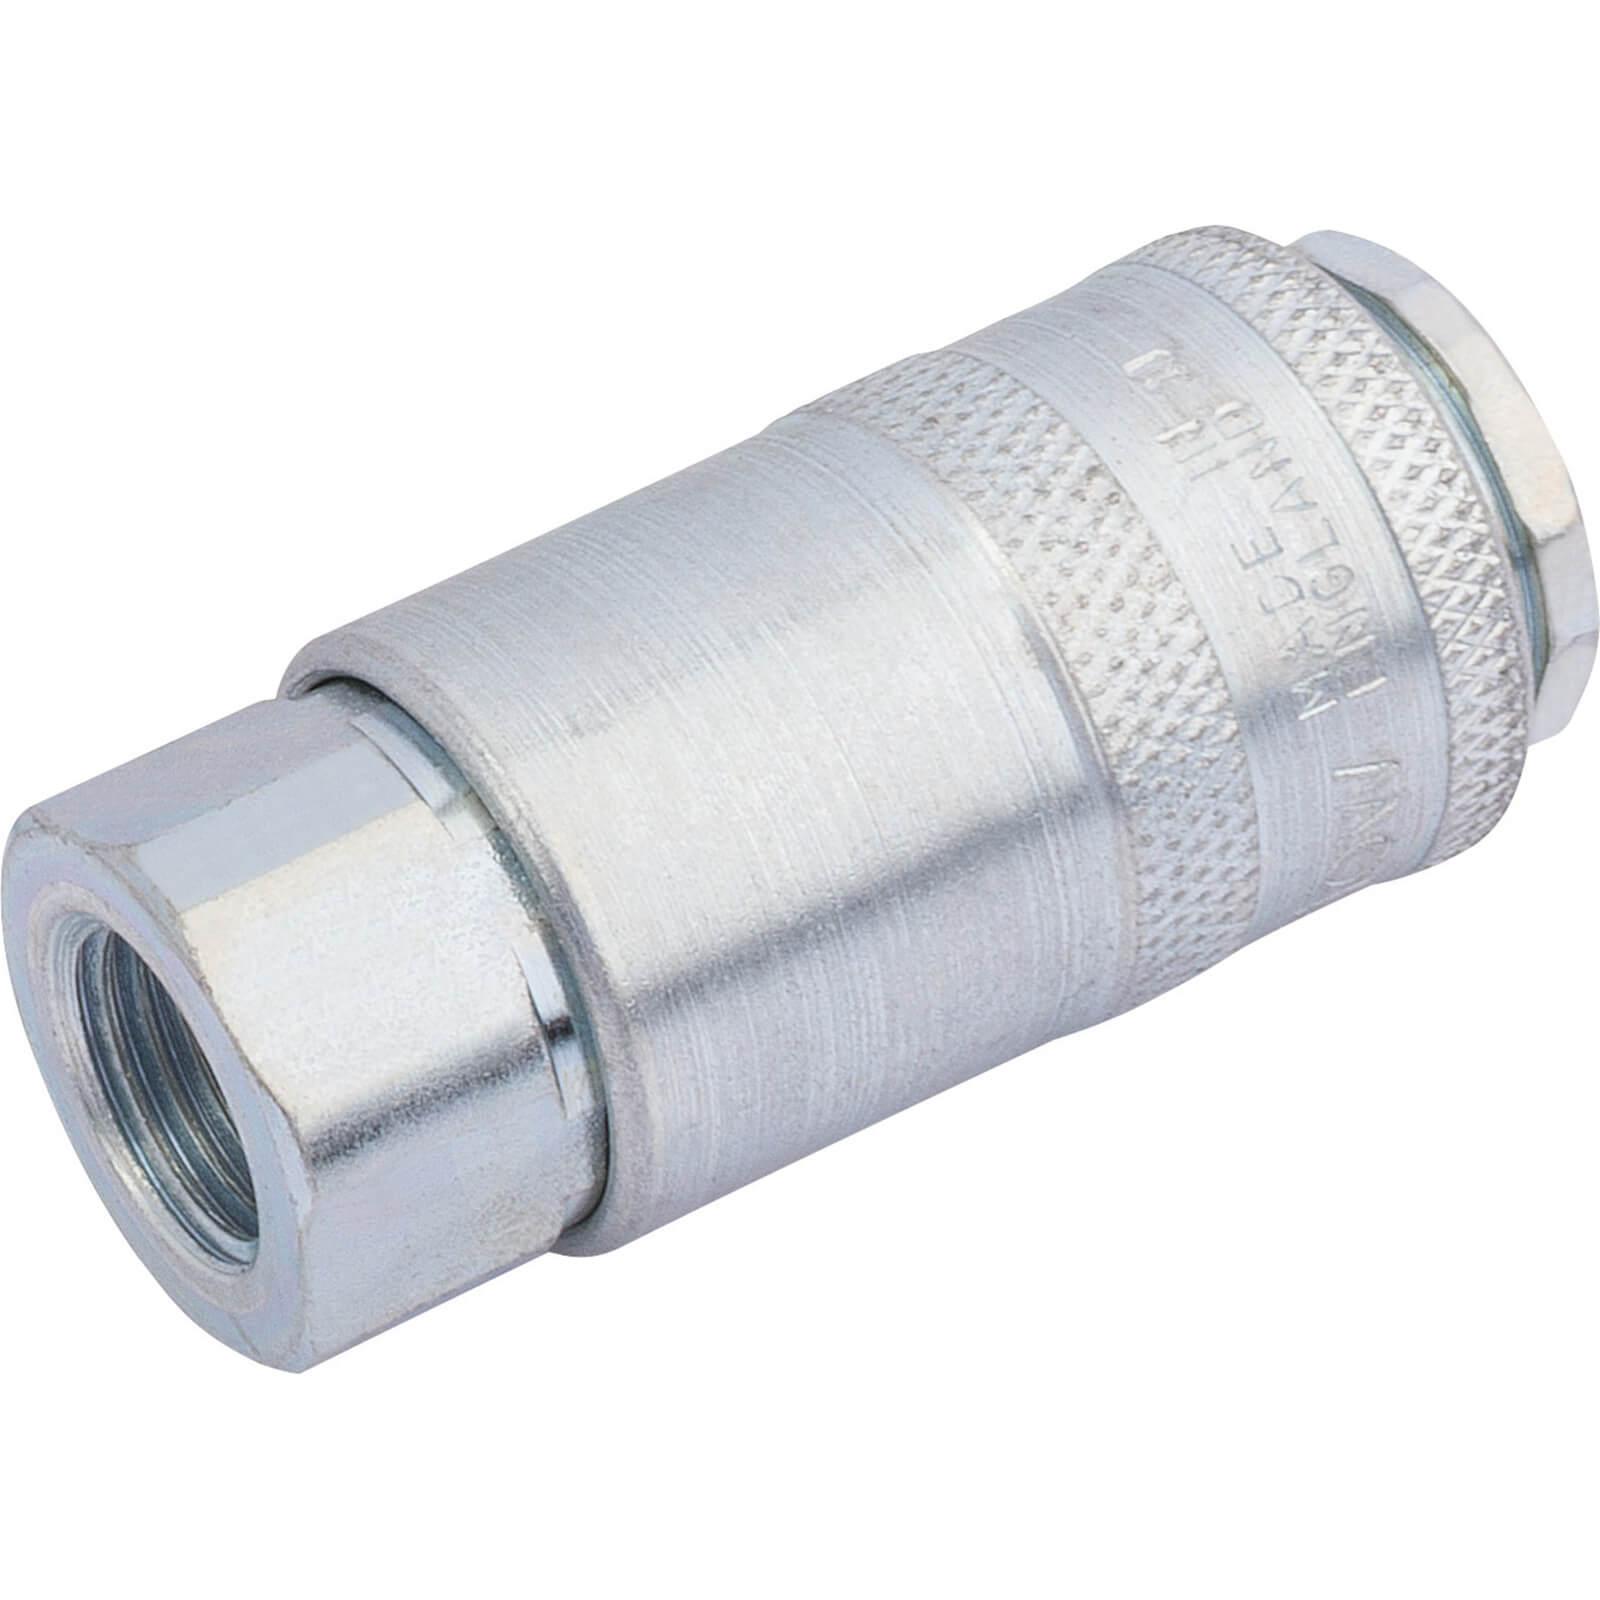 Photo of Draper Pcl Parallel Airflow Air Line Coupling Bsp Female Thread 1/4